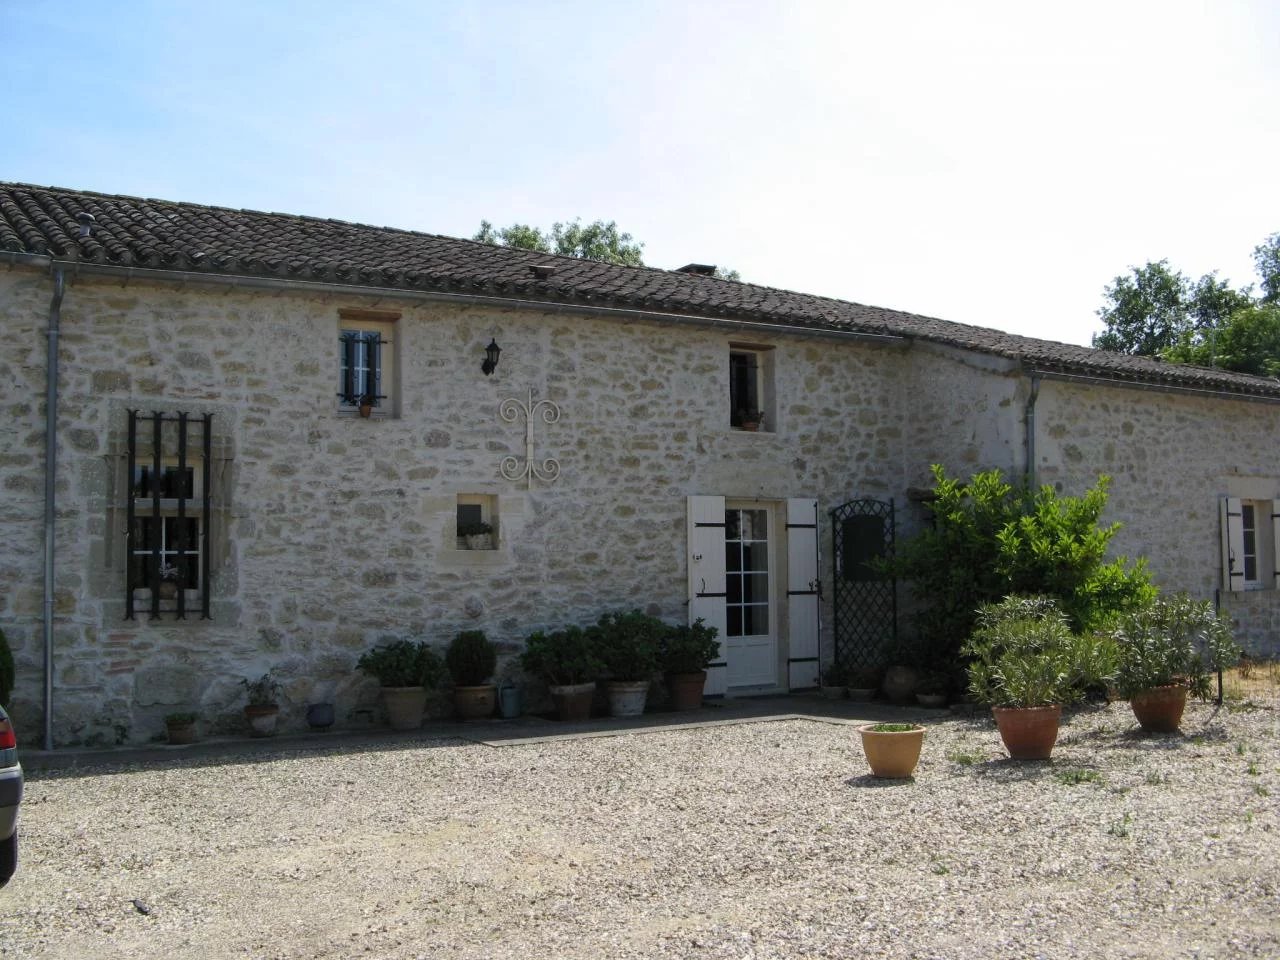 Investment Opportunity - Large stone property with 3 houses, barn and land near Monségur